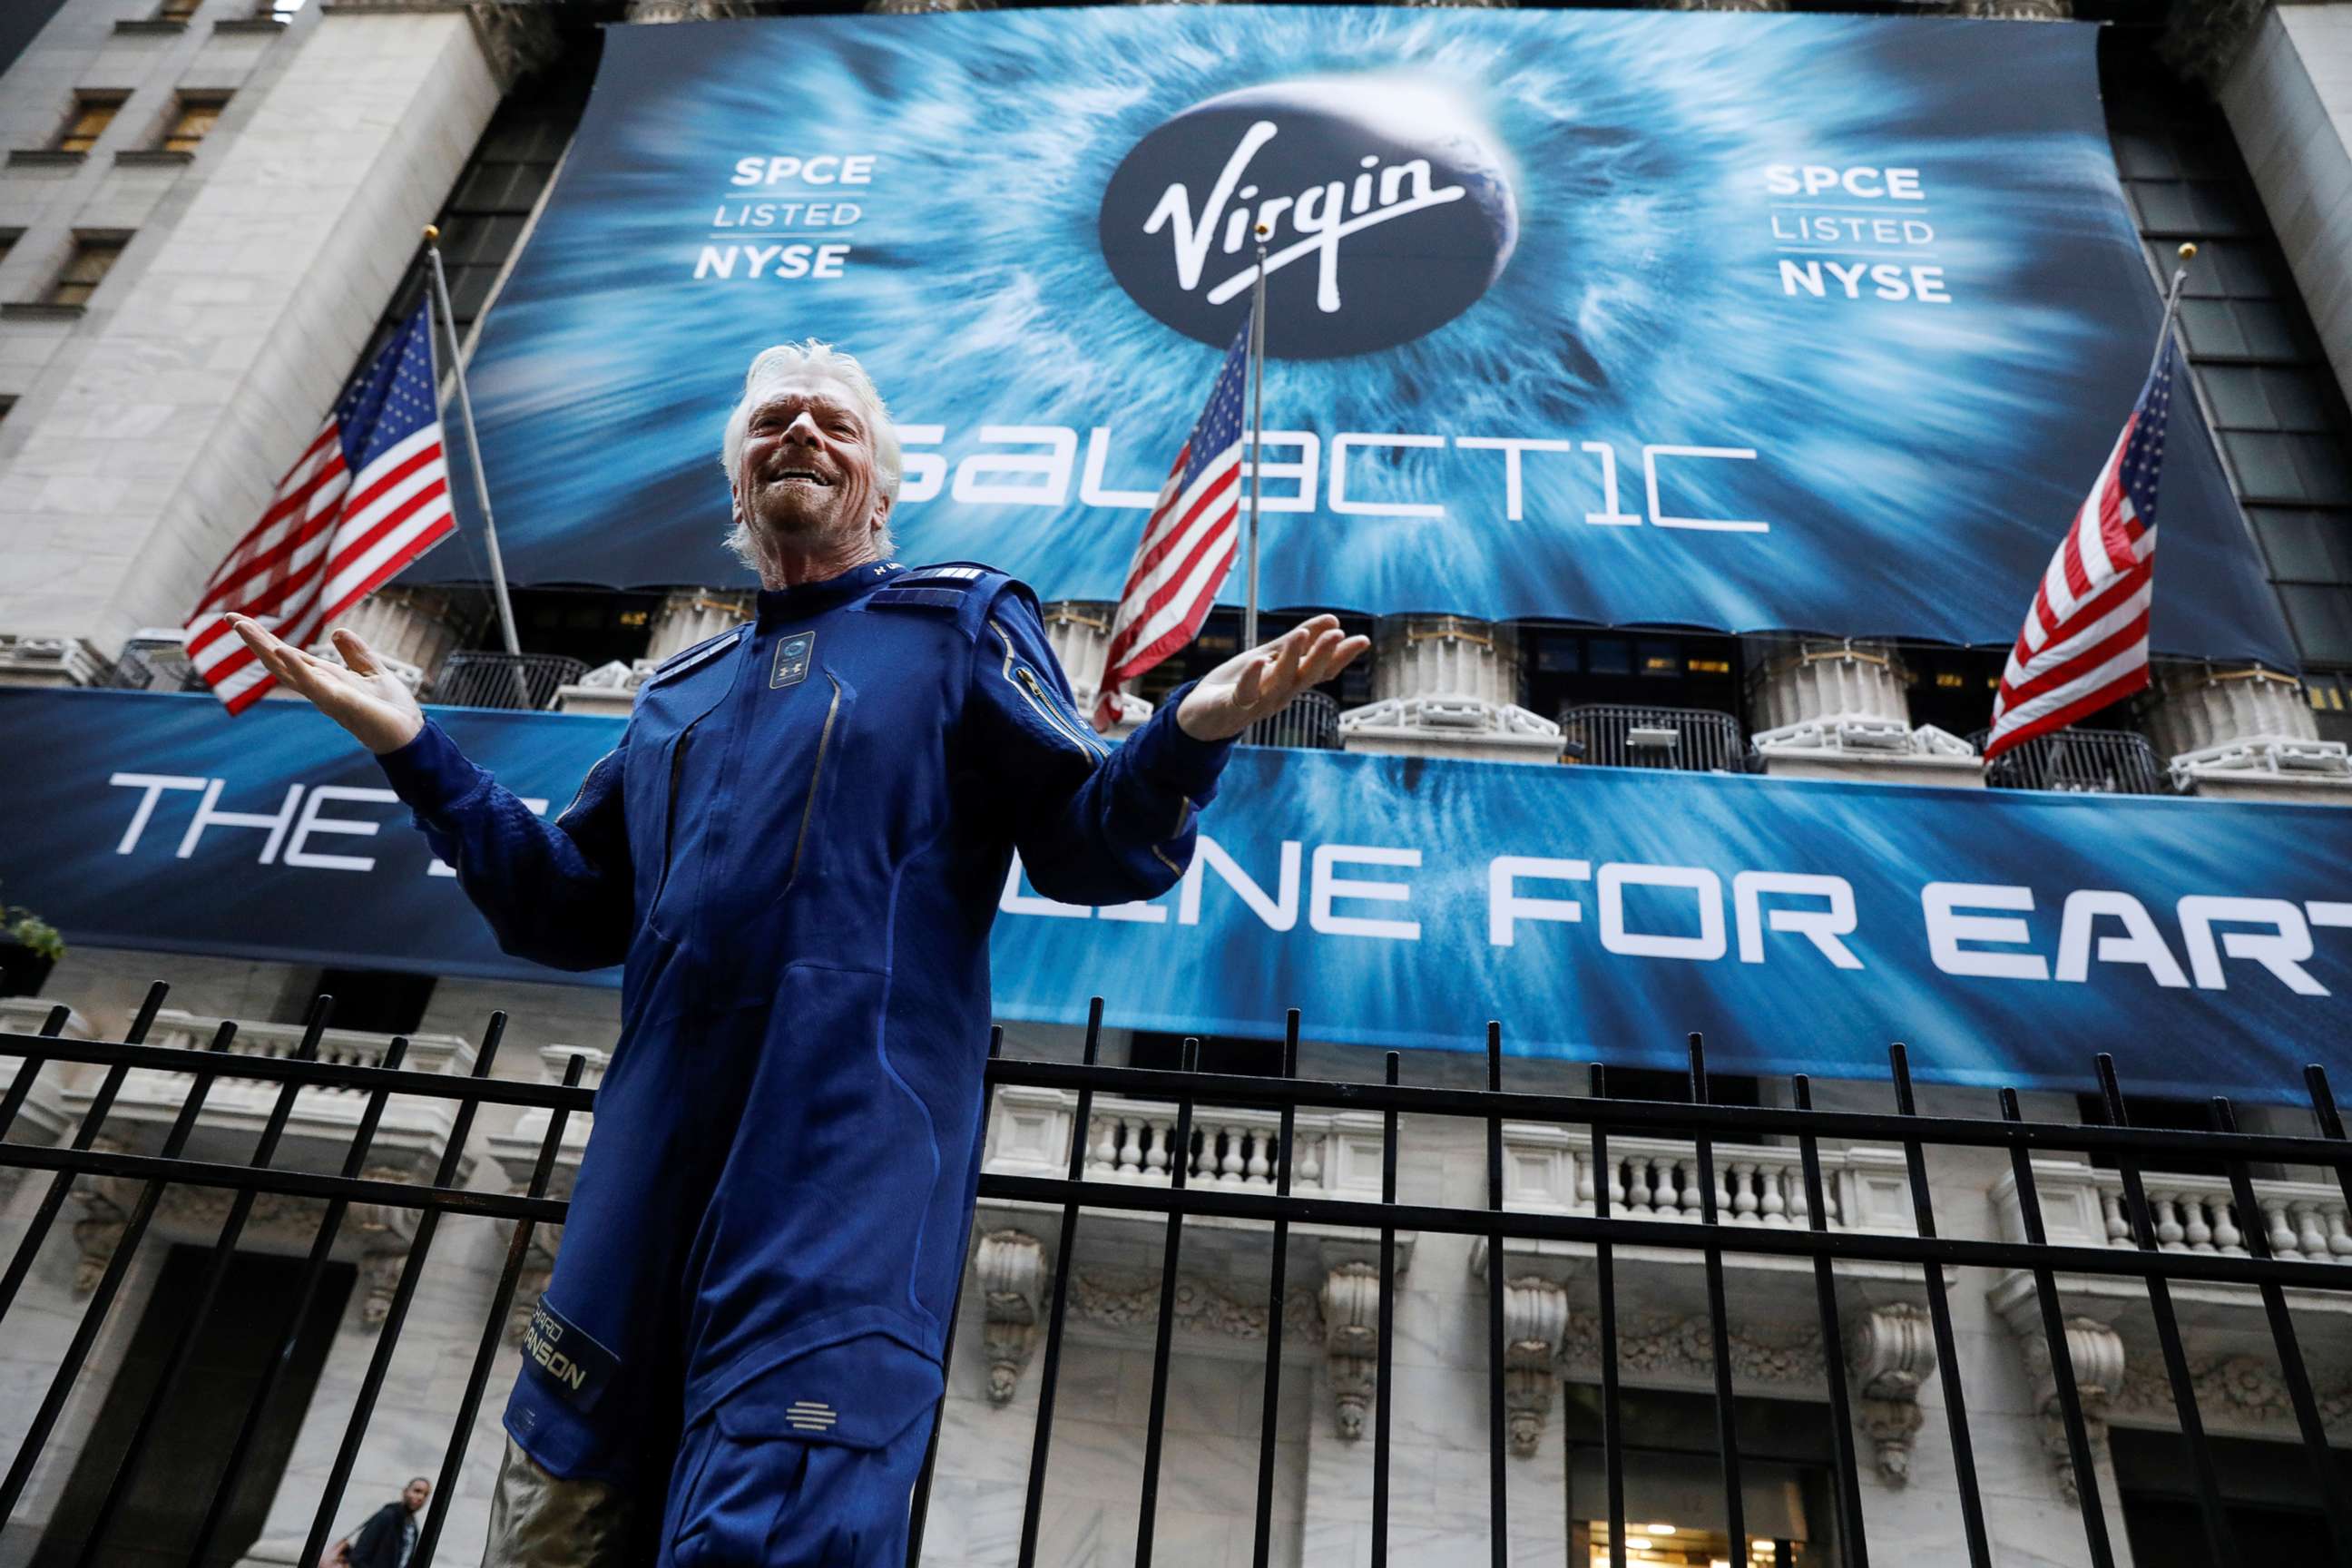 PHOTO: Sir Richard Branson stands outside the New York Stock Exchange ahead of the Virgin Galactic (SPCE) IPO in New York, Oct. 28, 2019.